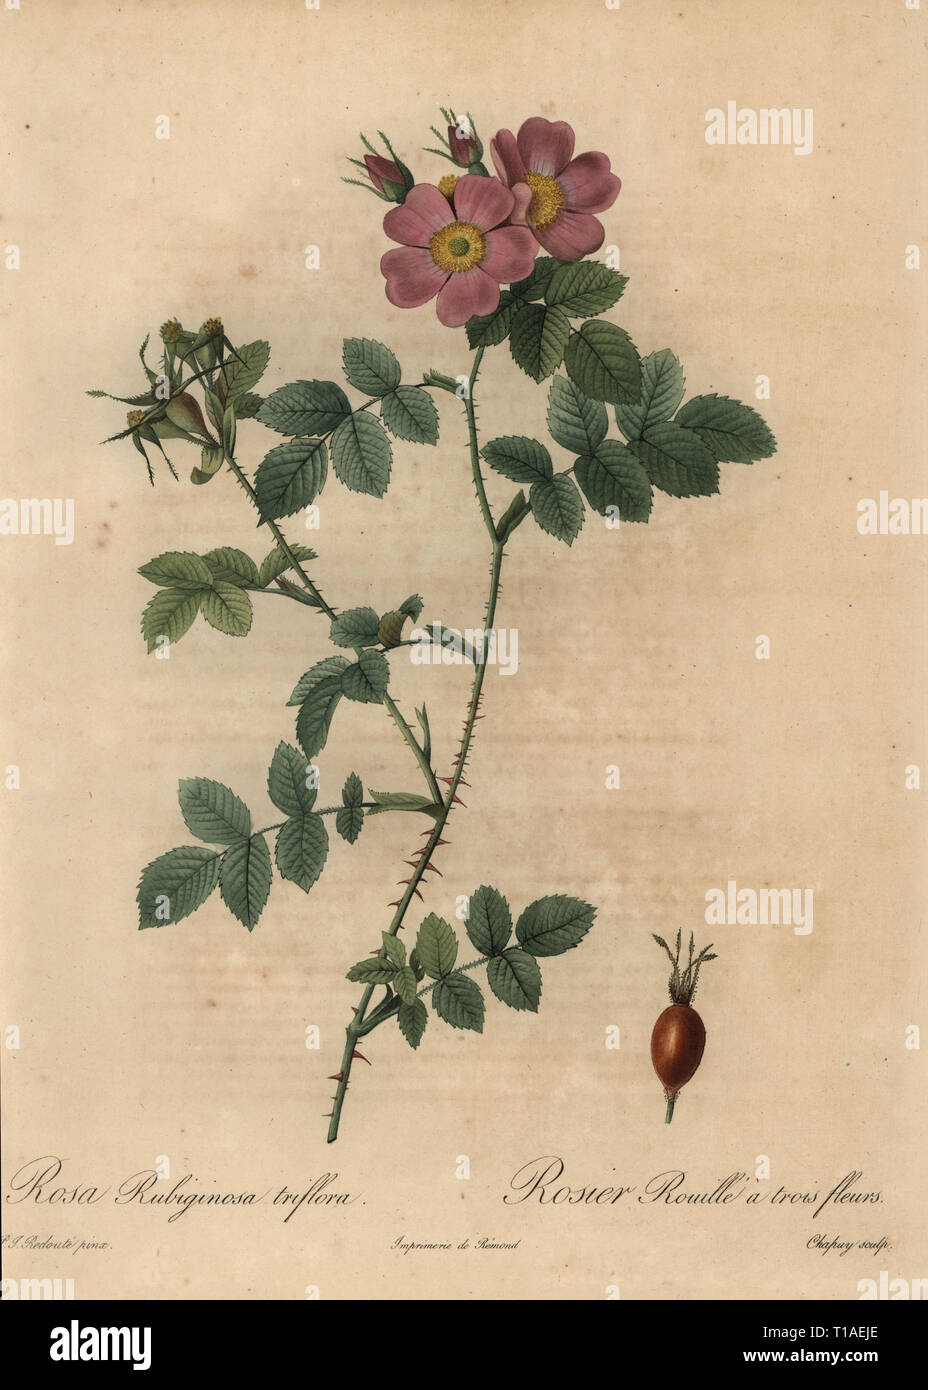 Pink sweetbriar rose, Rosa rubiginosa triflora, Rosier Rouille a trois fleurs. Stipple copperplate engraving by Jean Baptiste Chapuy handcoloured a la poupee after a botanical illustration by Pierre-Joseph Redoute from the first folio edition of Les Roses, Firmin Didot, Paris, 1817. Stock Photo